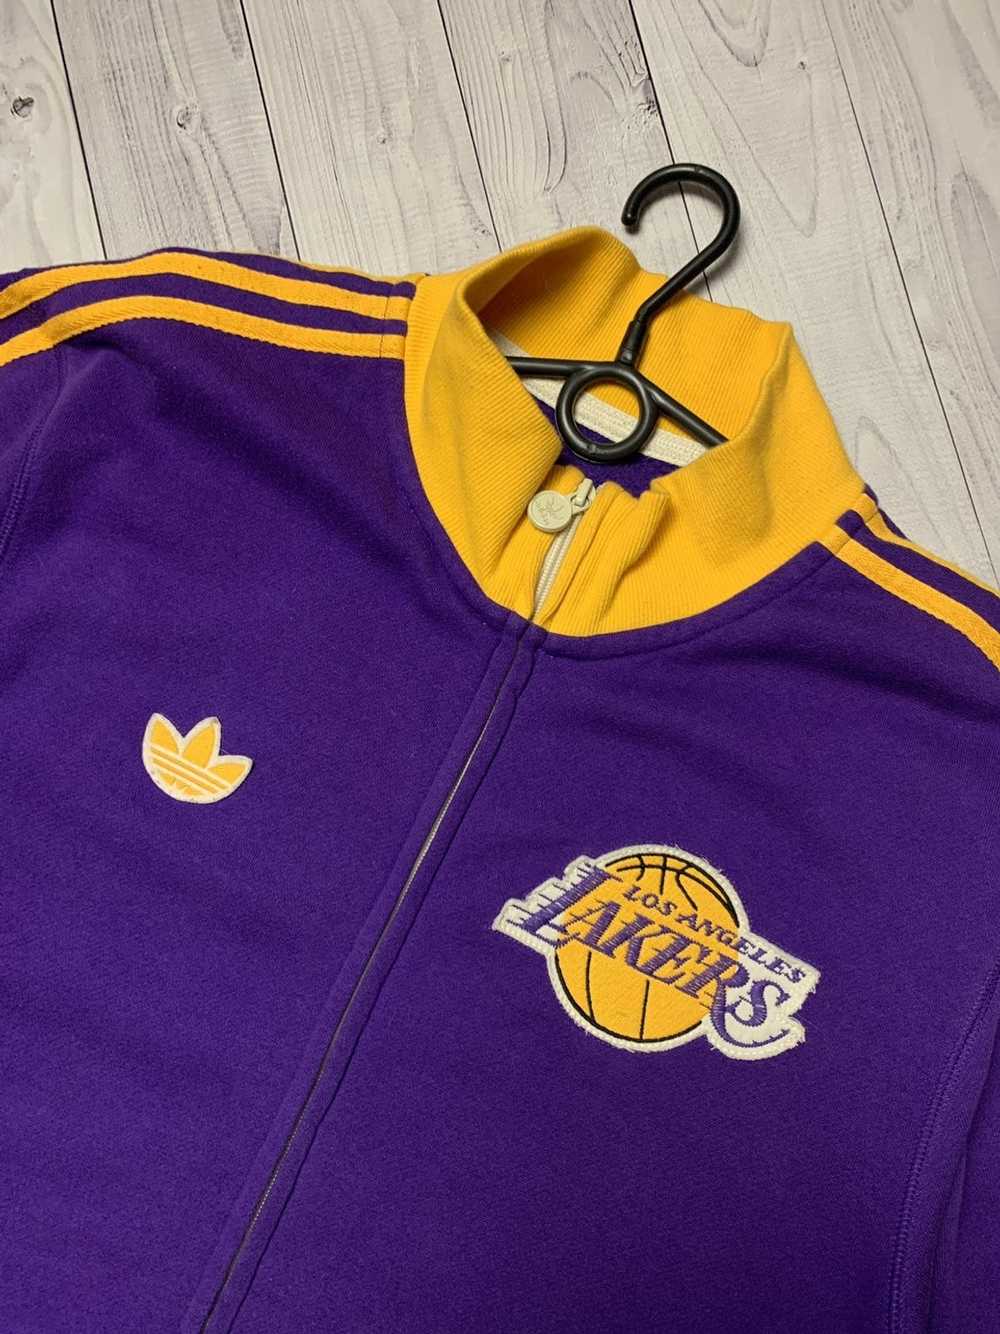 Adidas Los Angeles Lakers Youth Large 14/16 Yellow Purple Hoodie Stitched